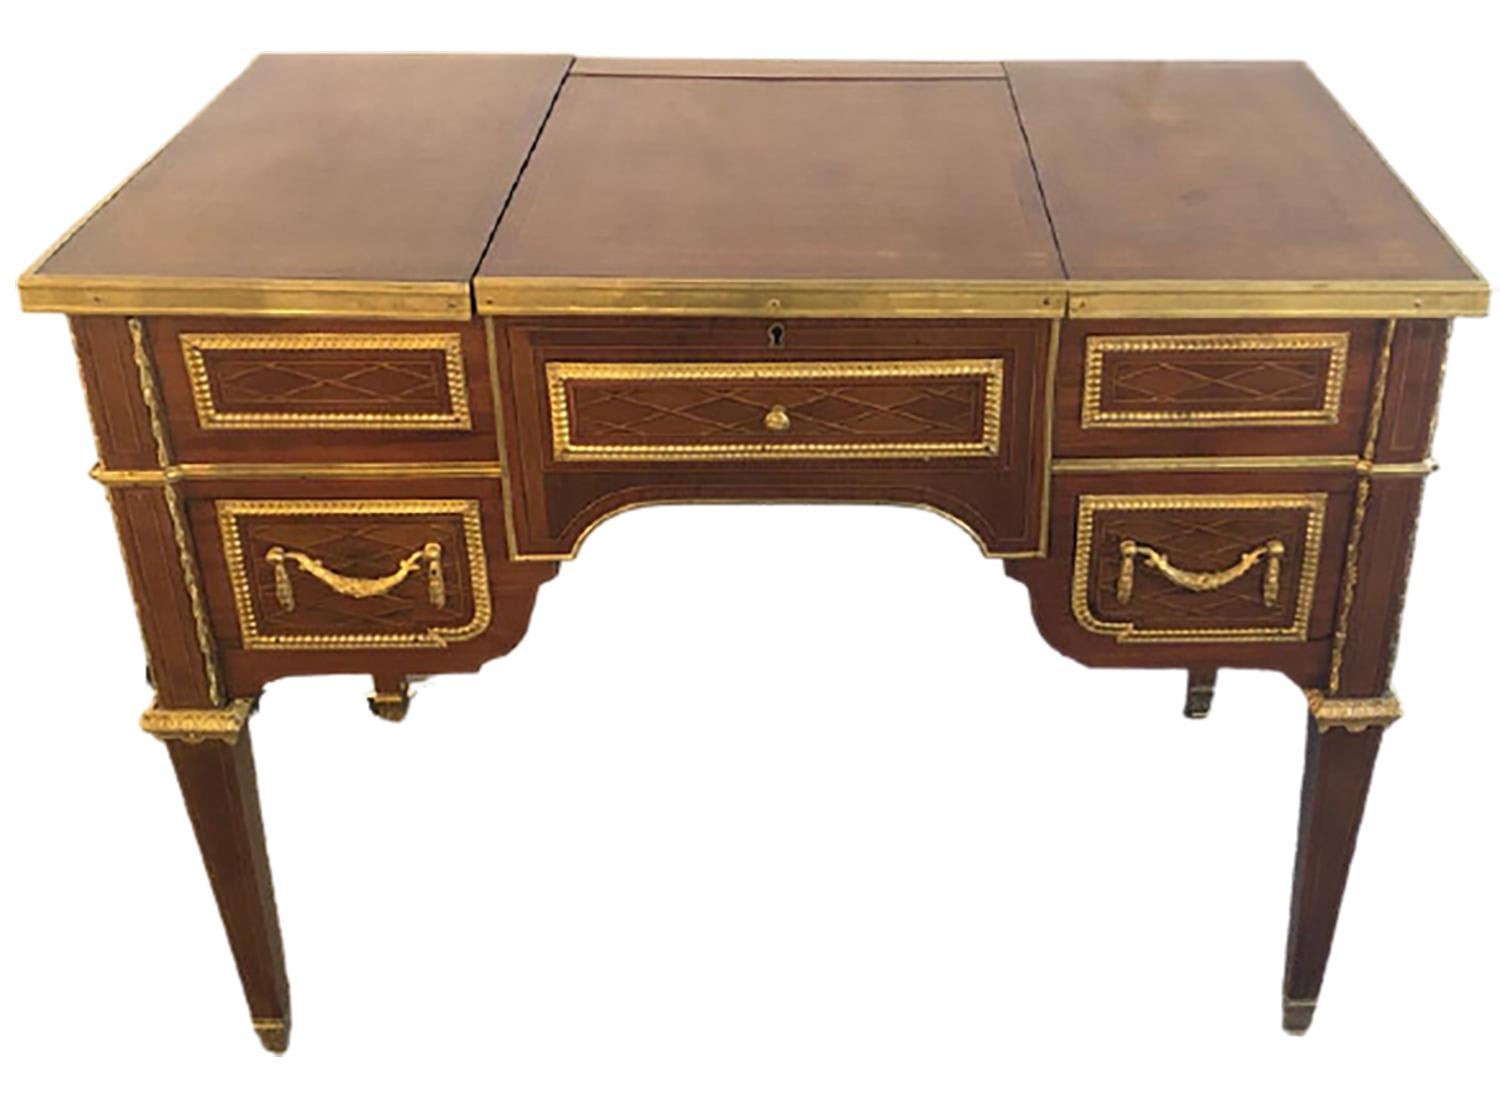 French 19th or early 20th century Louis XVI style gilt bronze mounted parquetry & marquetry dressing table, desk or vanity with interior flip up mirror. This stunning ladies desk or dressing table is certain to dazzle all. The finely gilt bronze